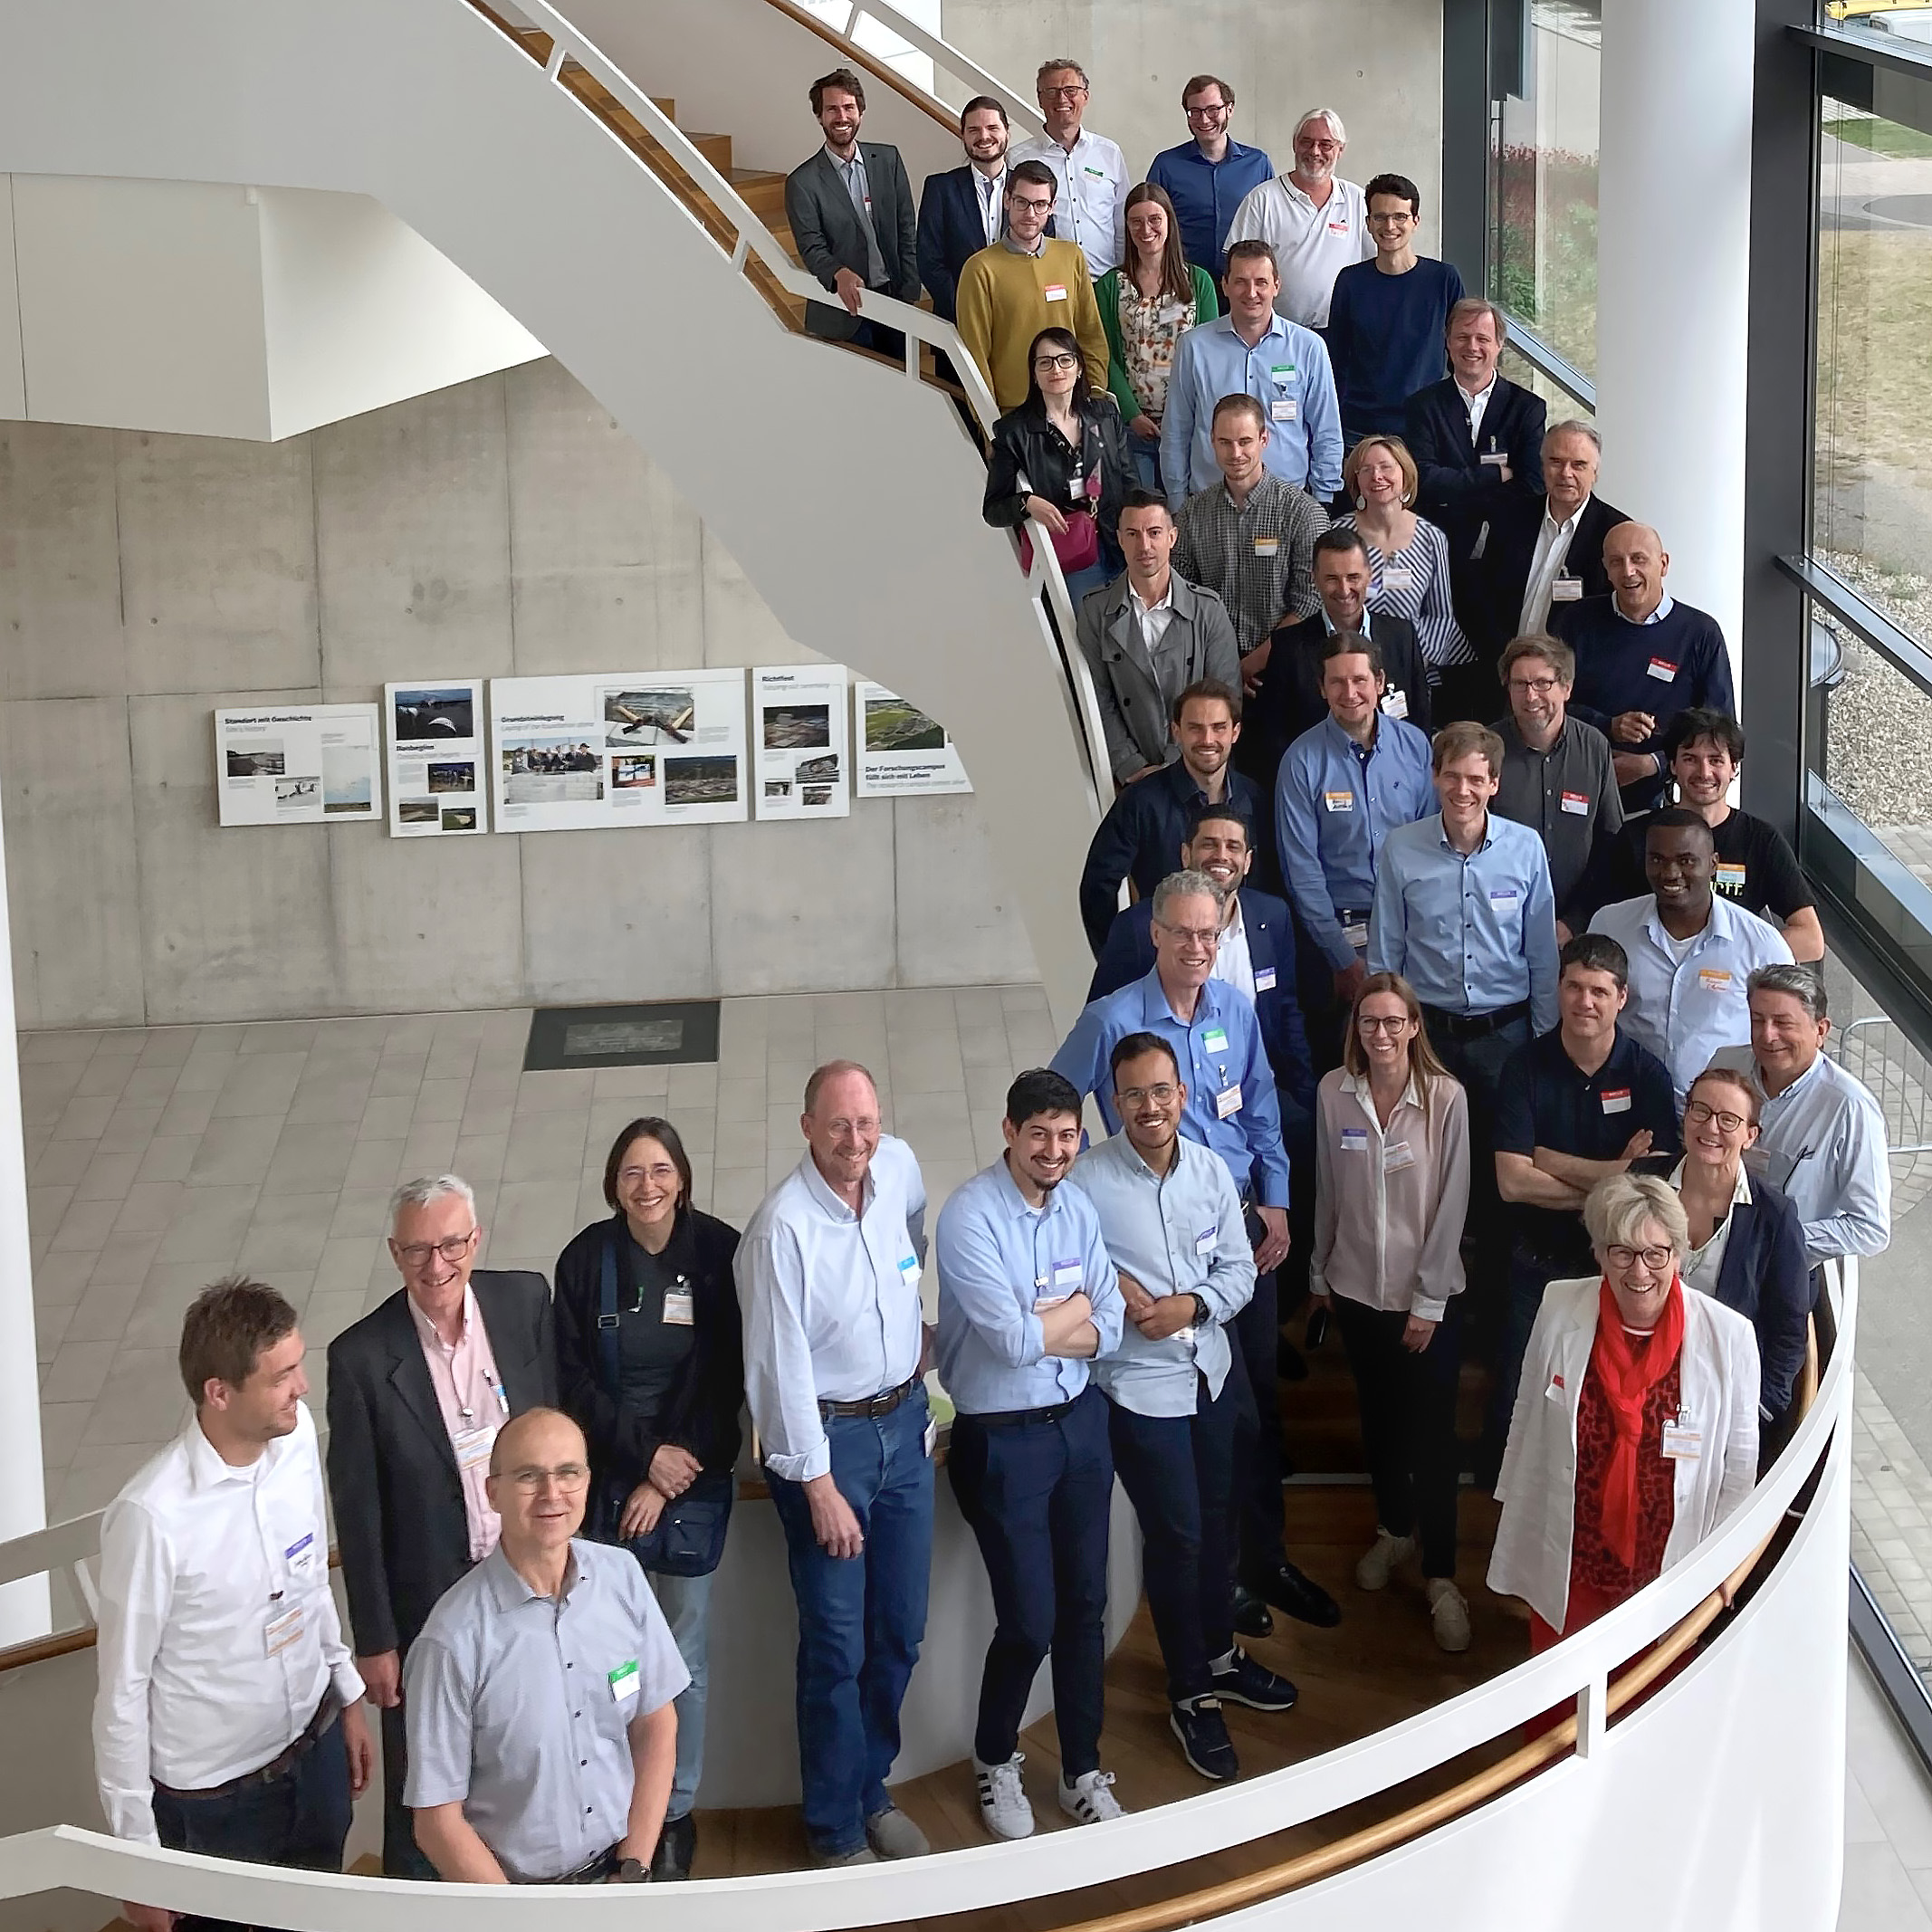 One year after the project kick-off, the YESvGaN project consortium finally met in person at the Bosch research campus in Renningen, Germany.